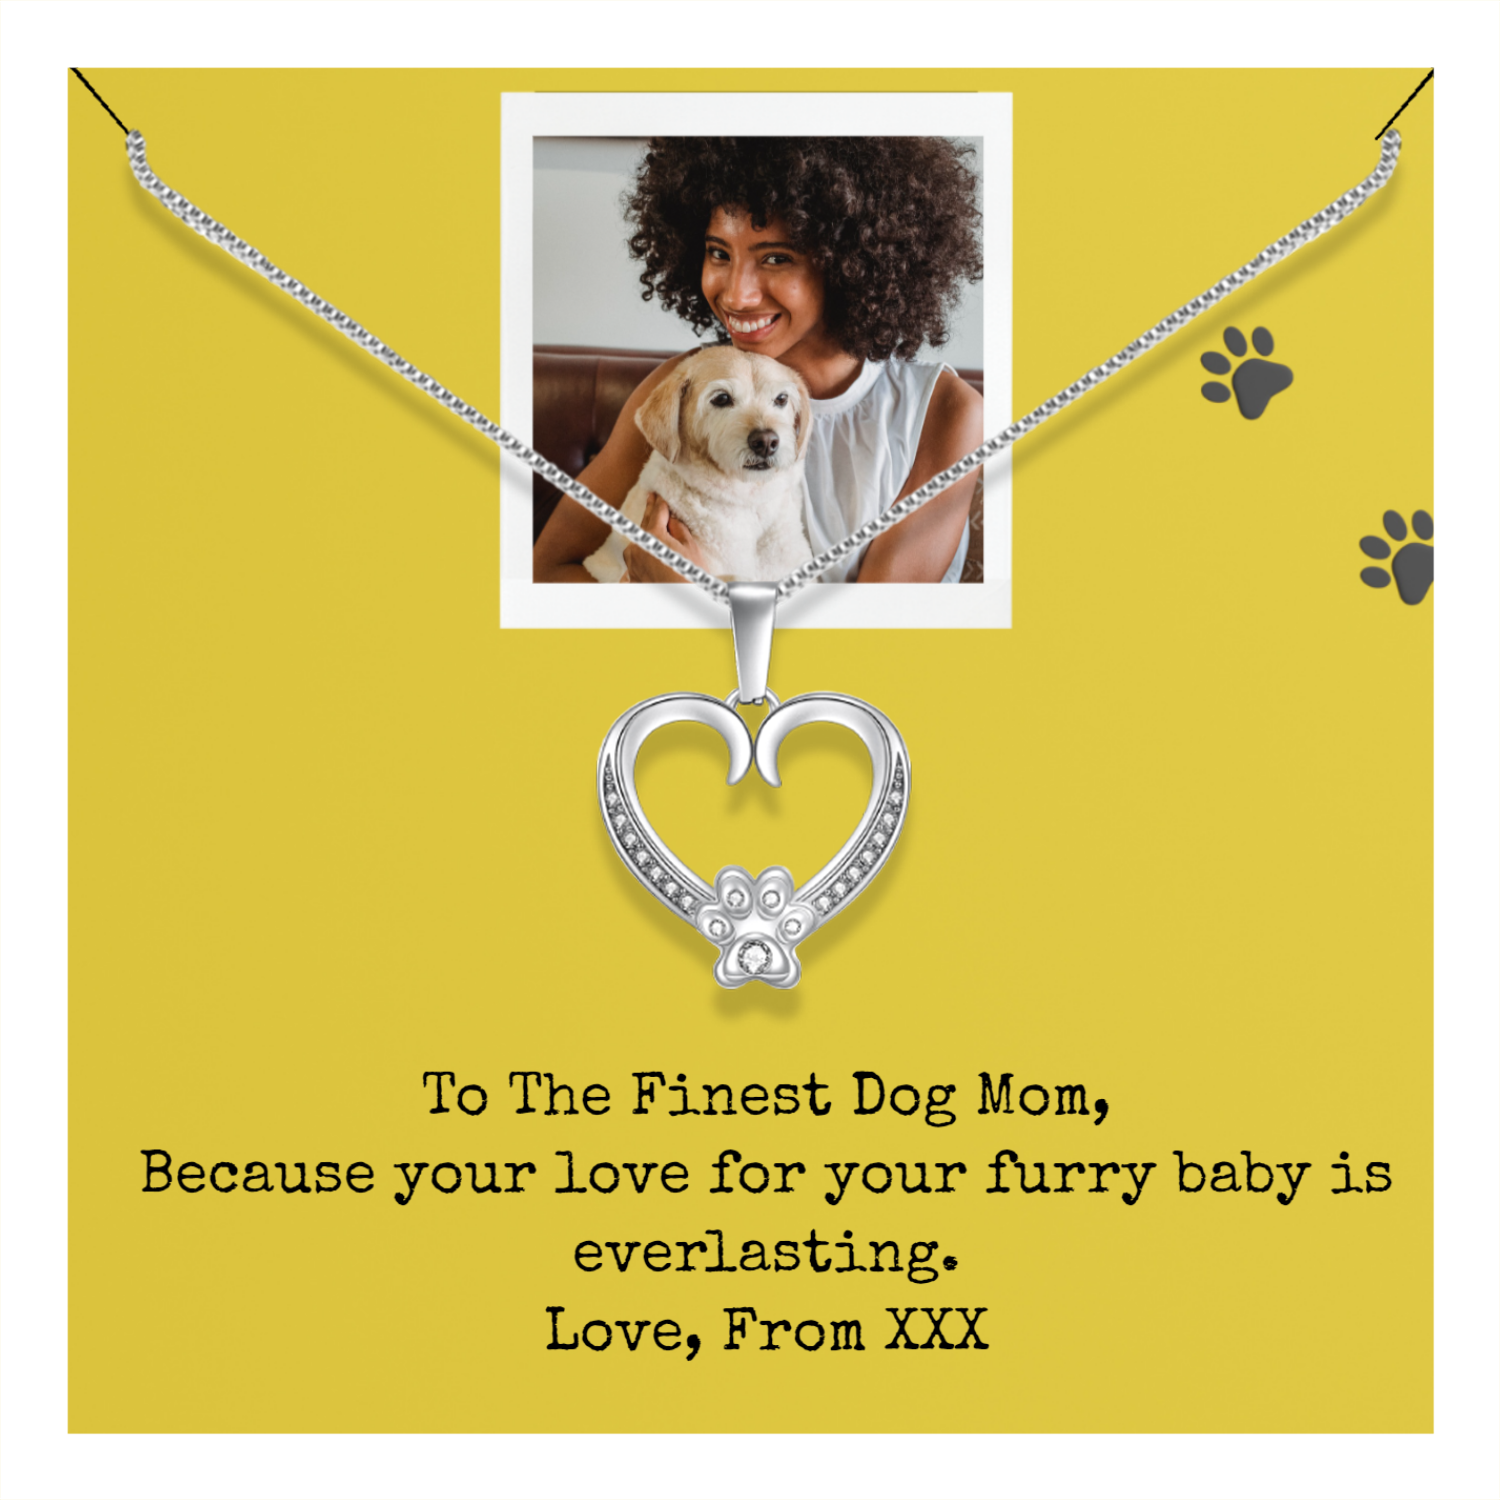 Personalized Necklaces + Message Cards - Paw Necklace + Personalized Card 